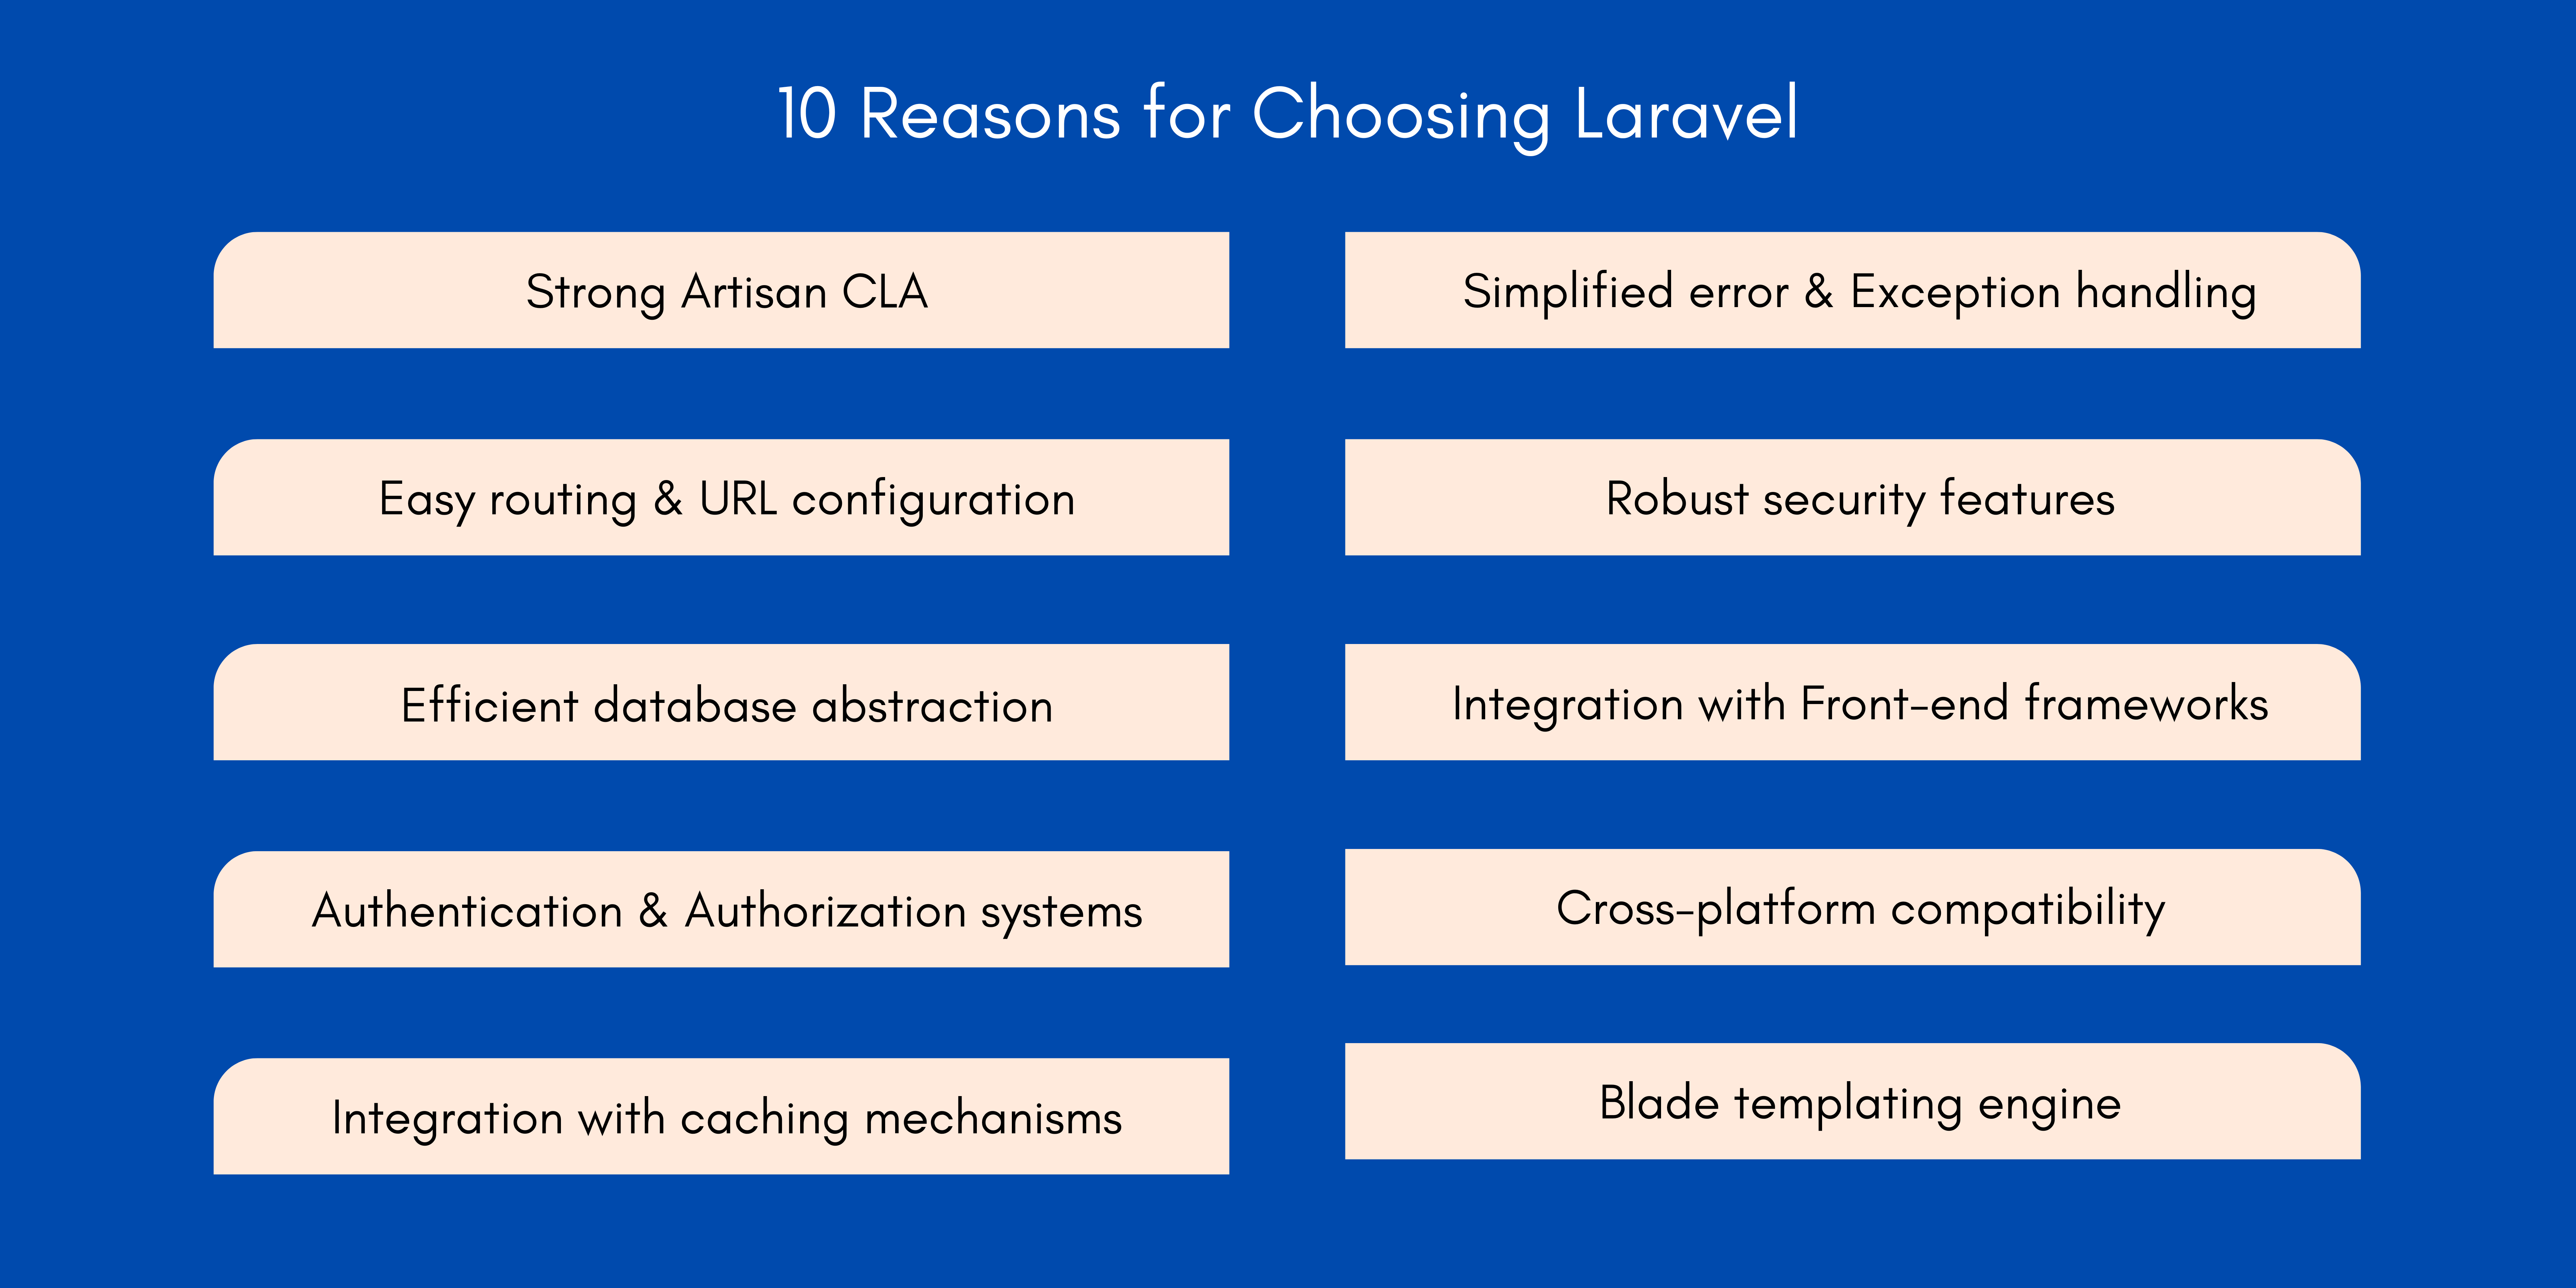 Why do Logistics Companies Look for Laravel Developers Info Image